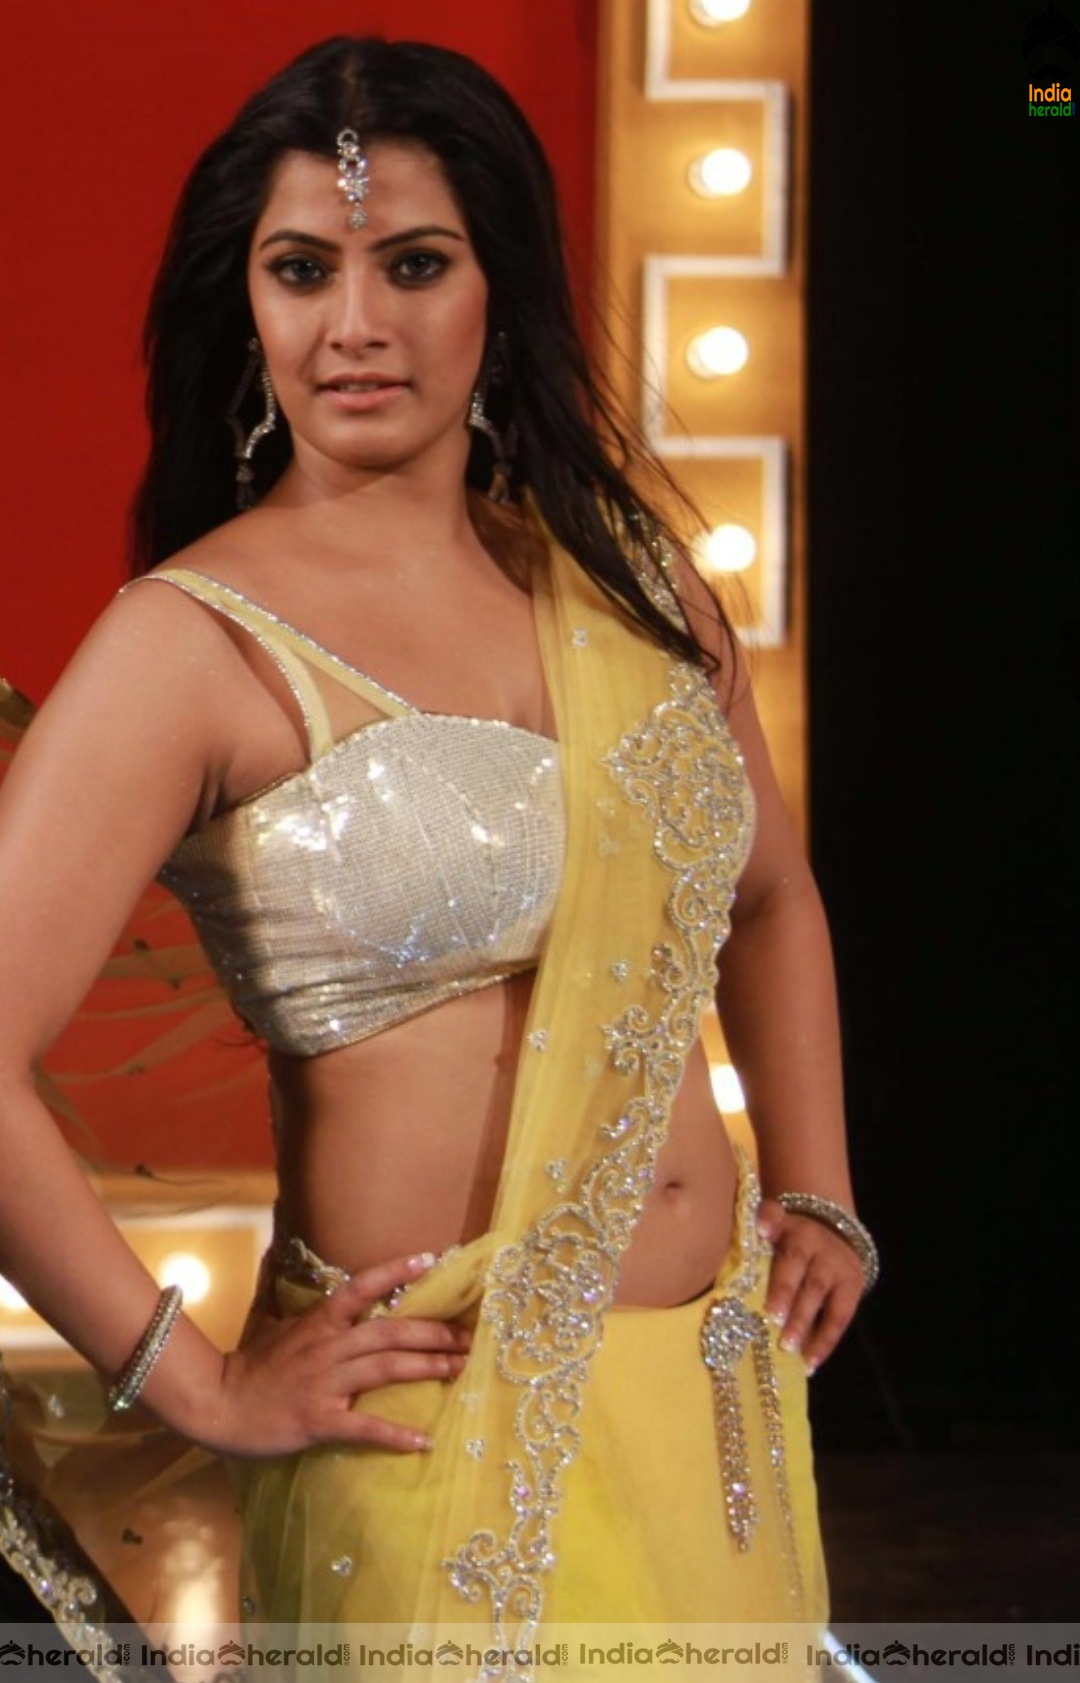 Hottest Exposing Photos of Varalaxmi and Anjali flaunting their fleshy belly and assets Set 2